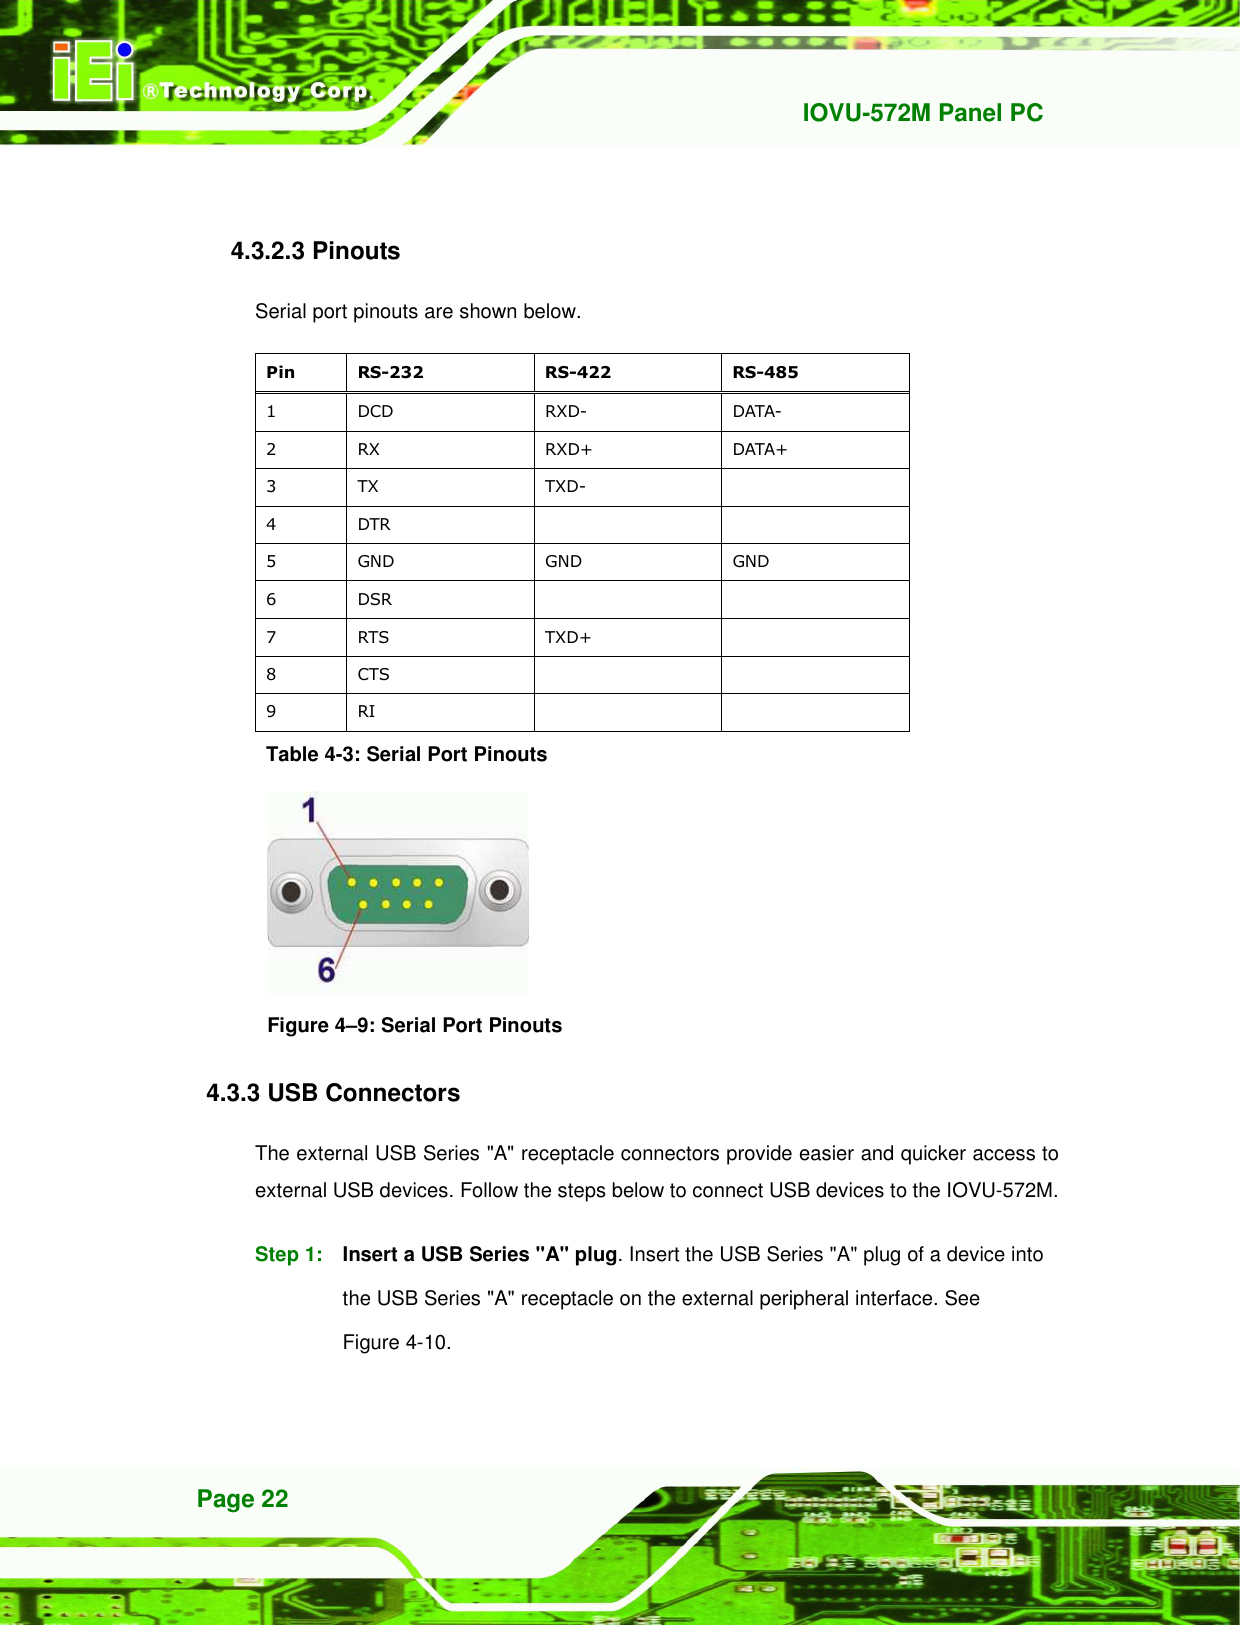   IOVU-572M Panel PC Page 22 Step 0: 4.3.2.3 Pinouts Serial port pinouts are shown below. Pin  RS-232  RS-422  RS-485 1  DCD  RXD-  DATA- 2  RX  RXD+  DATA+ 3  TX  TXD-   4  DTR     5  GND  GND  GND 6  DSR     7  RTS  TXD+   8  CTS     9  RI     Table 4-3: Serial Port Pinouts   Figure 4–9: Serial Port Pinouts 4.3.3 USB Connectors The external USB Series &quot;A&quot; receptacle connectors provide easier and quicker access to external USB devices. Follow the steps below to connect USB devices to the IOVU-572M. Step 1:  Insert a USB Series &quot;A&quot; plug. Insert the USB Series &quot;A&quot; plug of a device into the USB Series &quot;A&quot; receptacle on the external peripheral interface. See Figure 4-10. Step 0: 